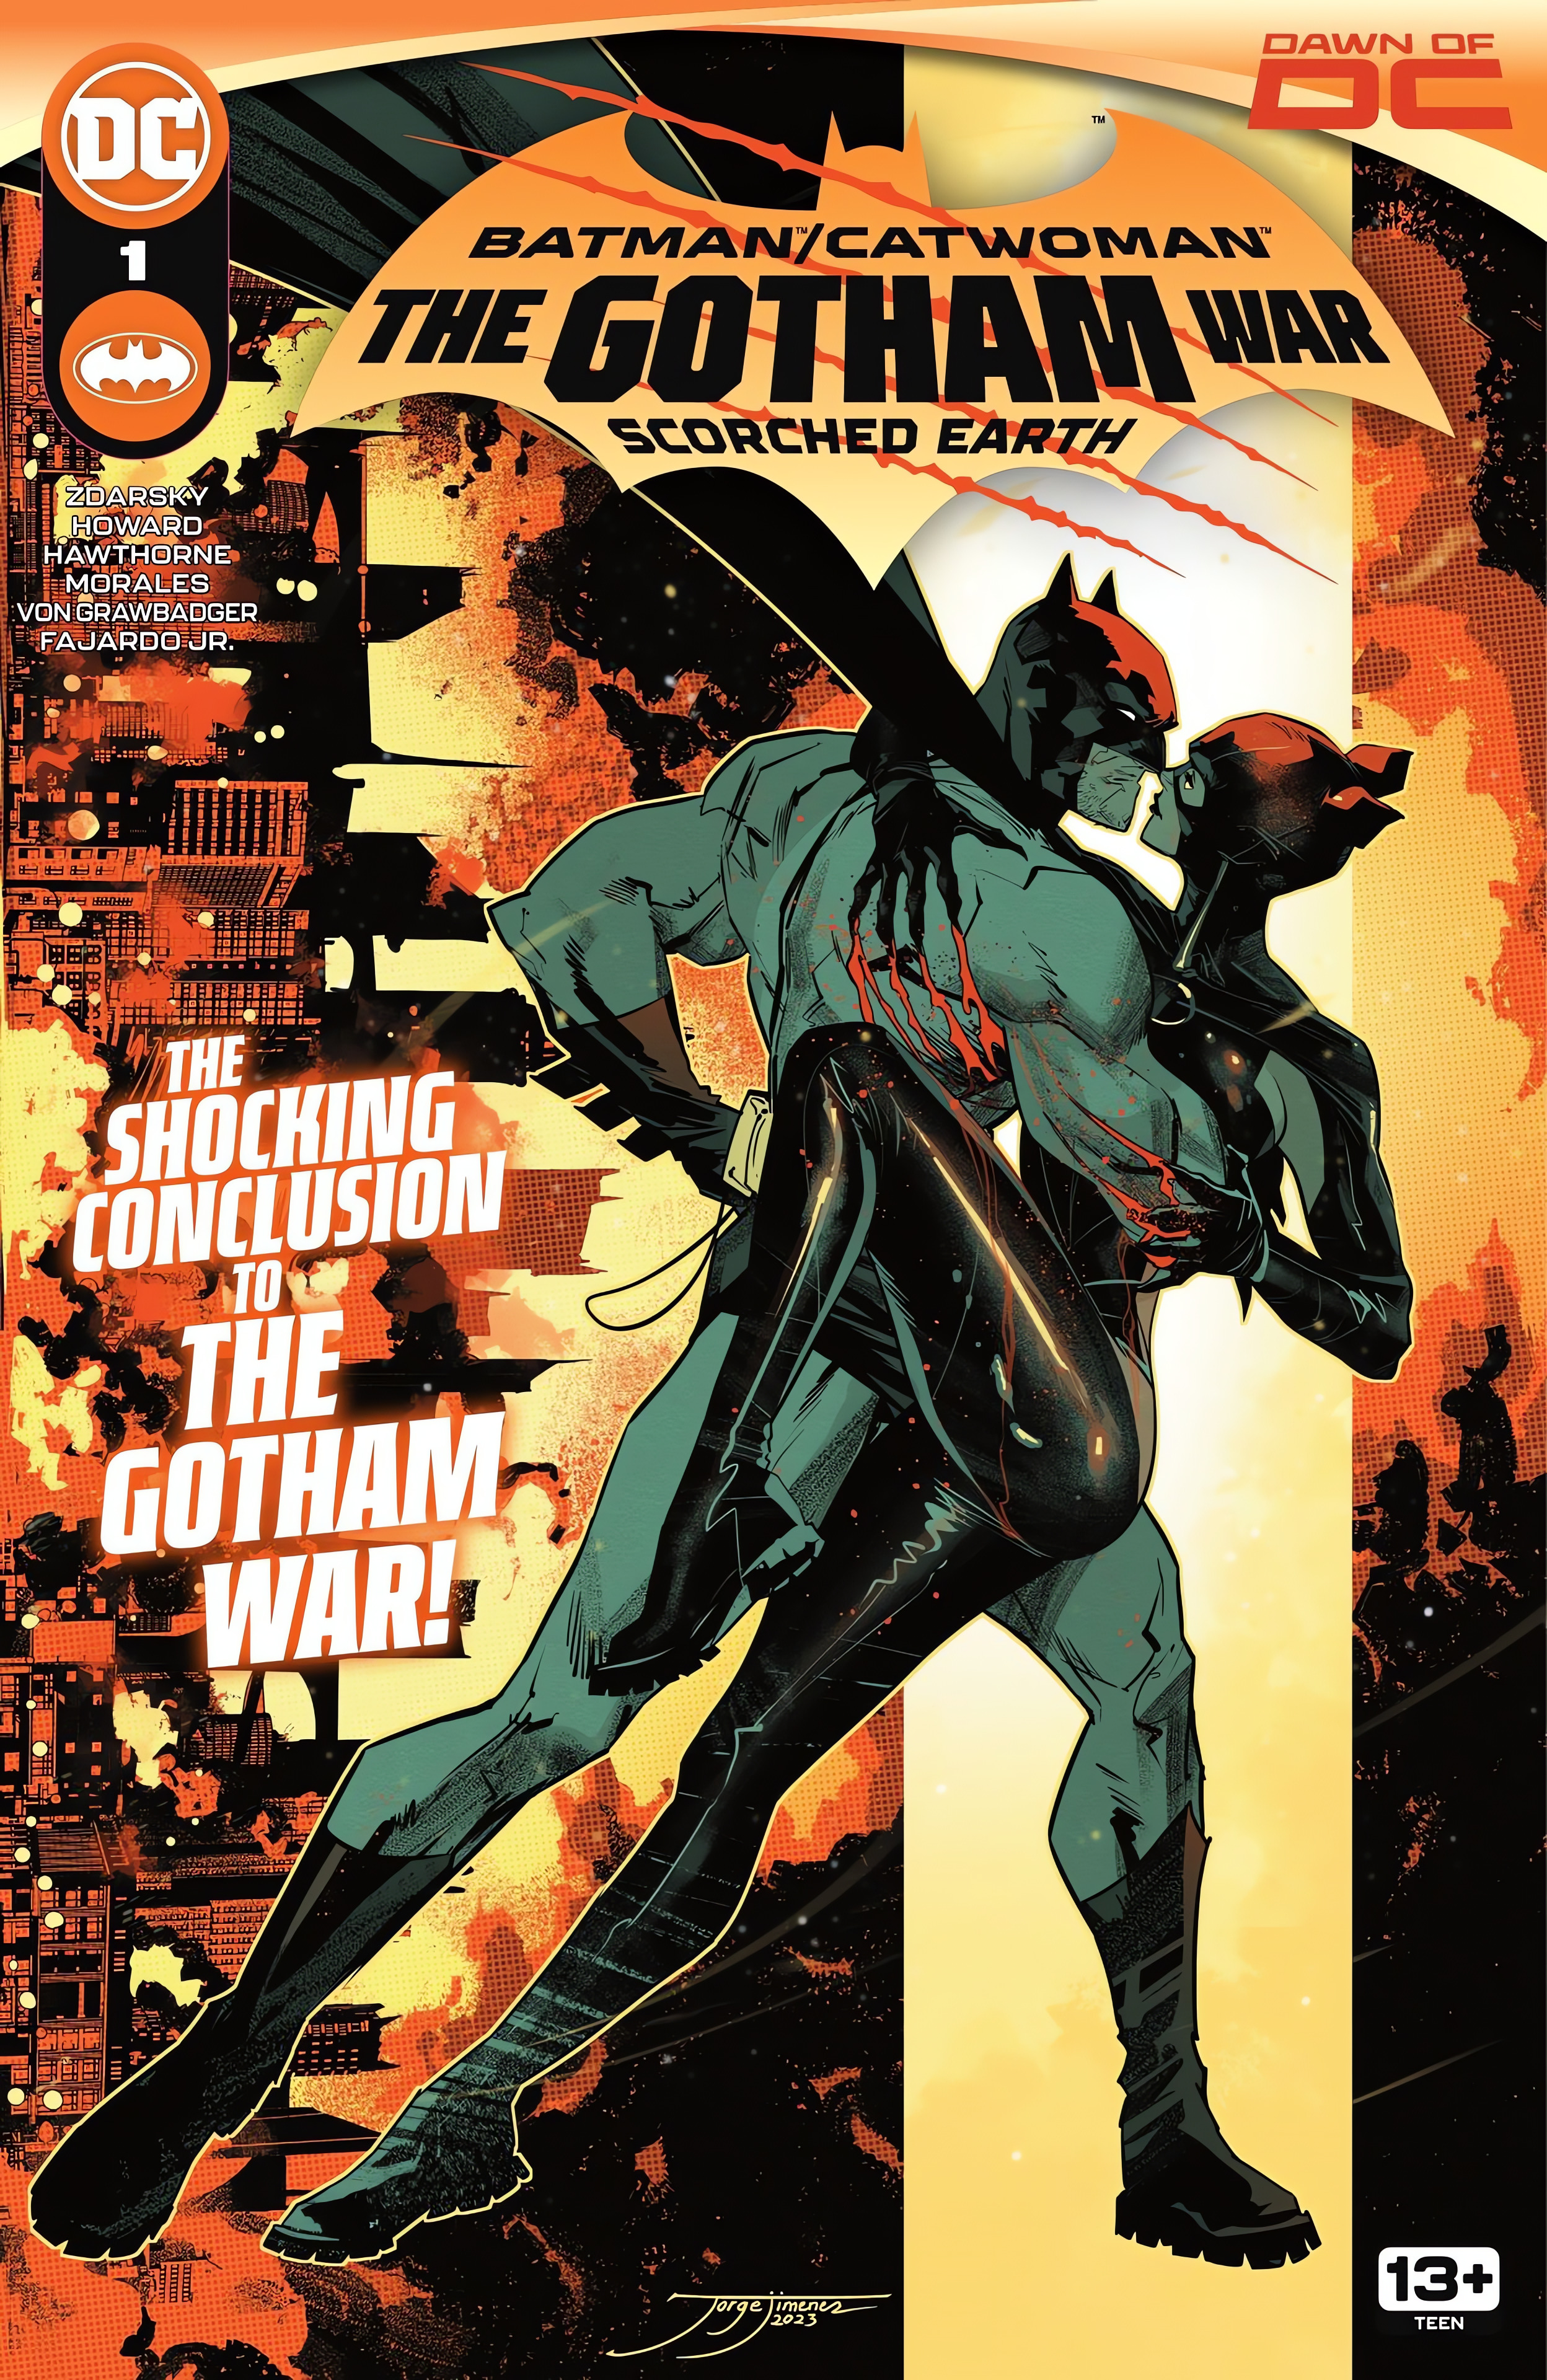 Read online Batman/Catwoman: The Gotham War: Scorched Earth comic -  Issue # Full - 1